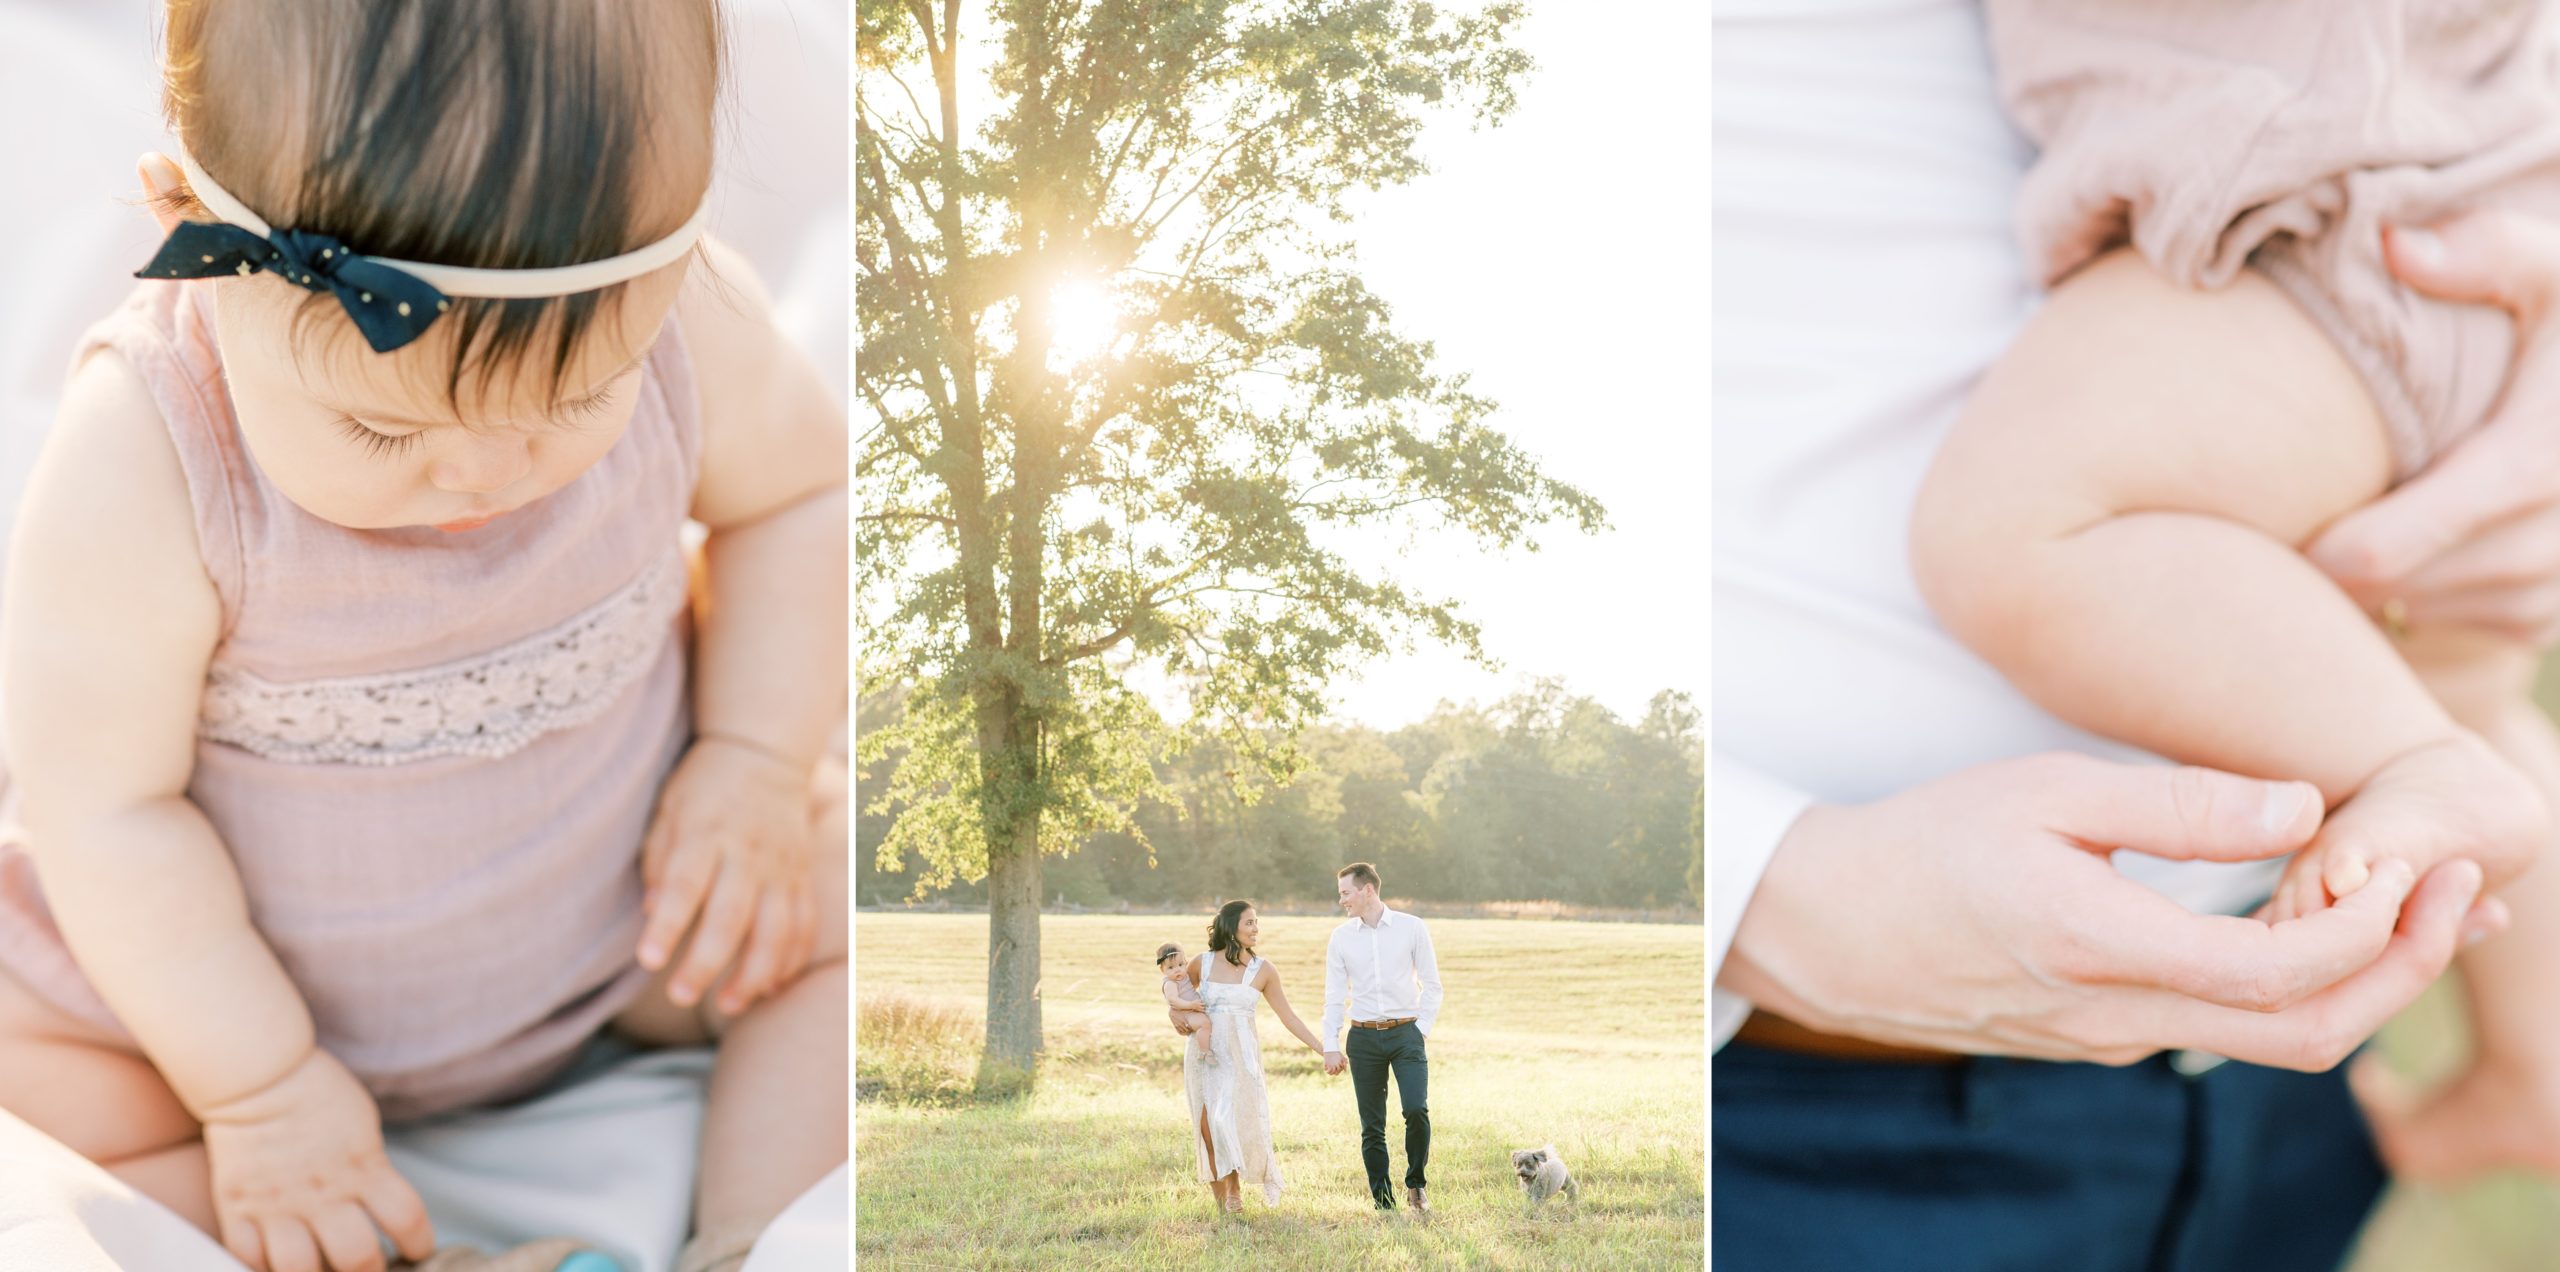 This Washington, DC wedding photographer reviews the highlights of her family & anniversary portrait sessions from the 2020 season.